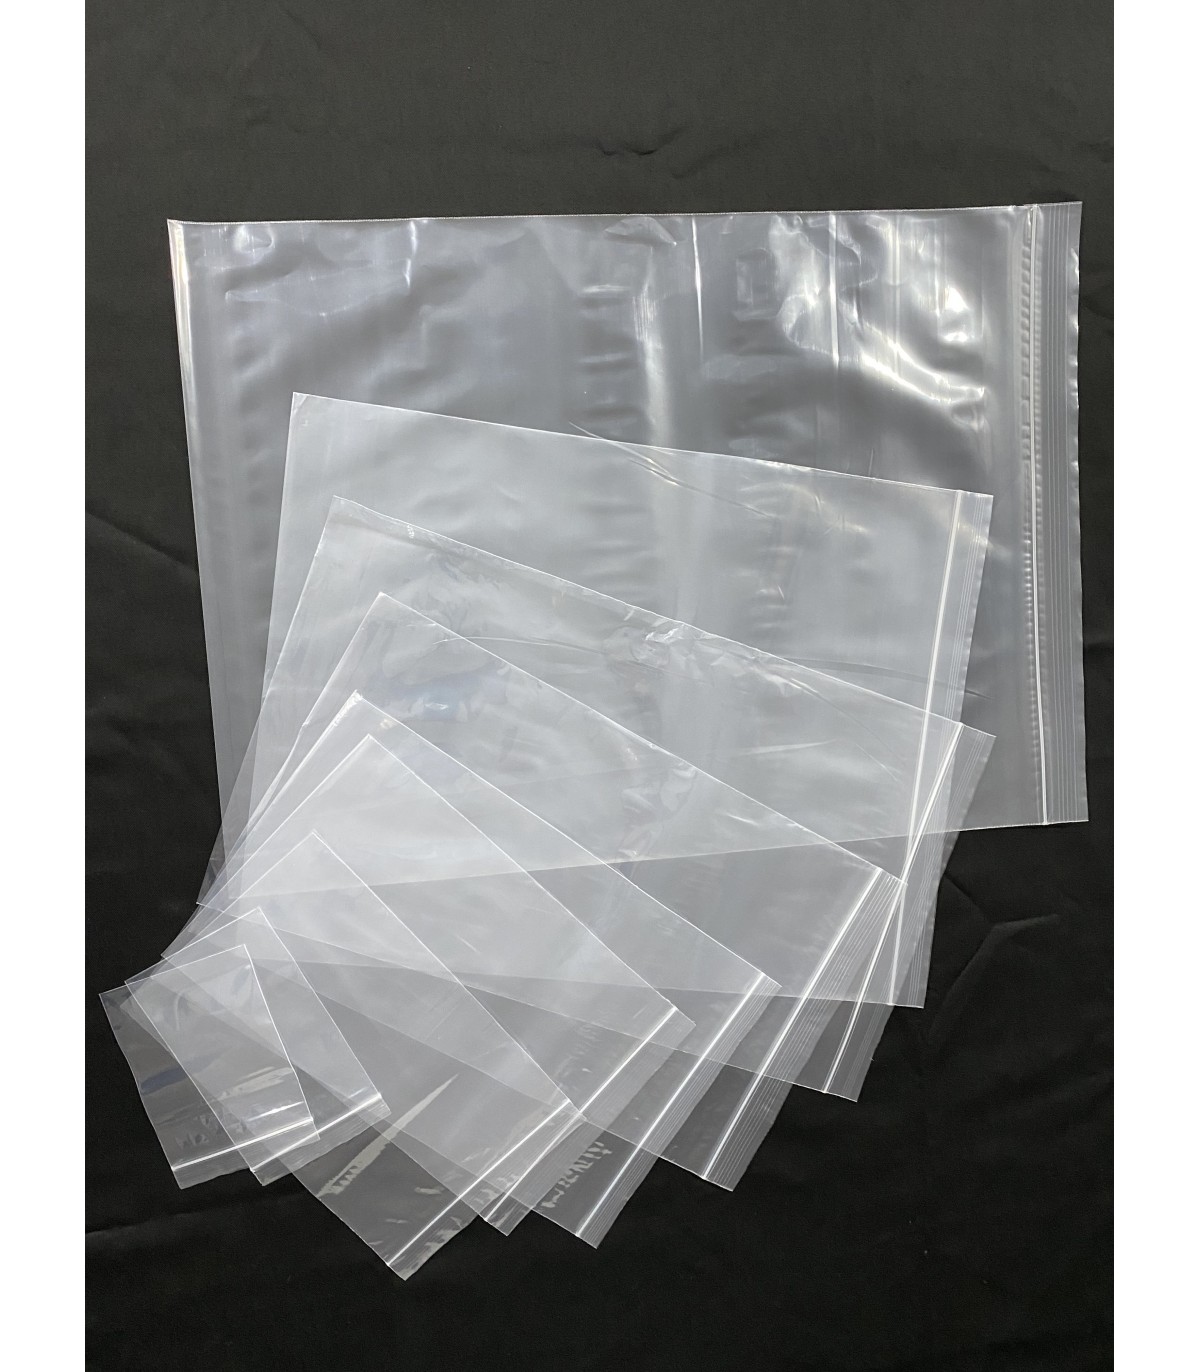 Grip Seal Bags 9 x 12.75 A4 - Clear Plastic Resealable